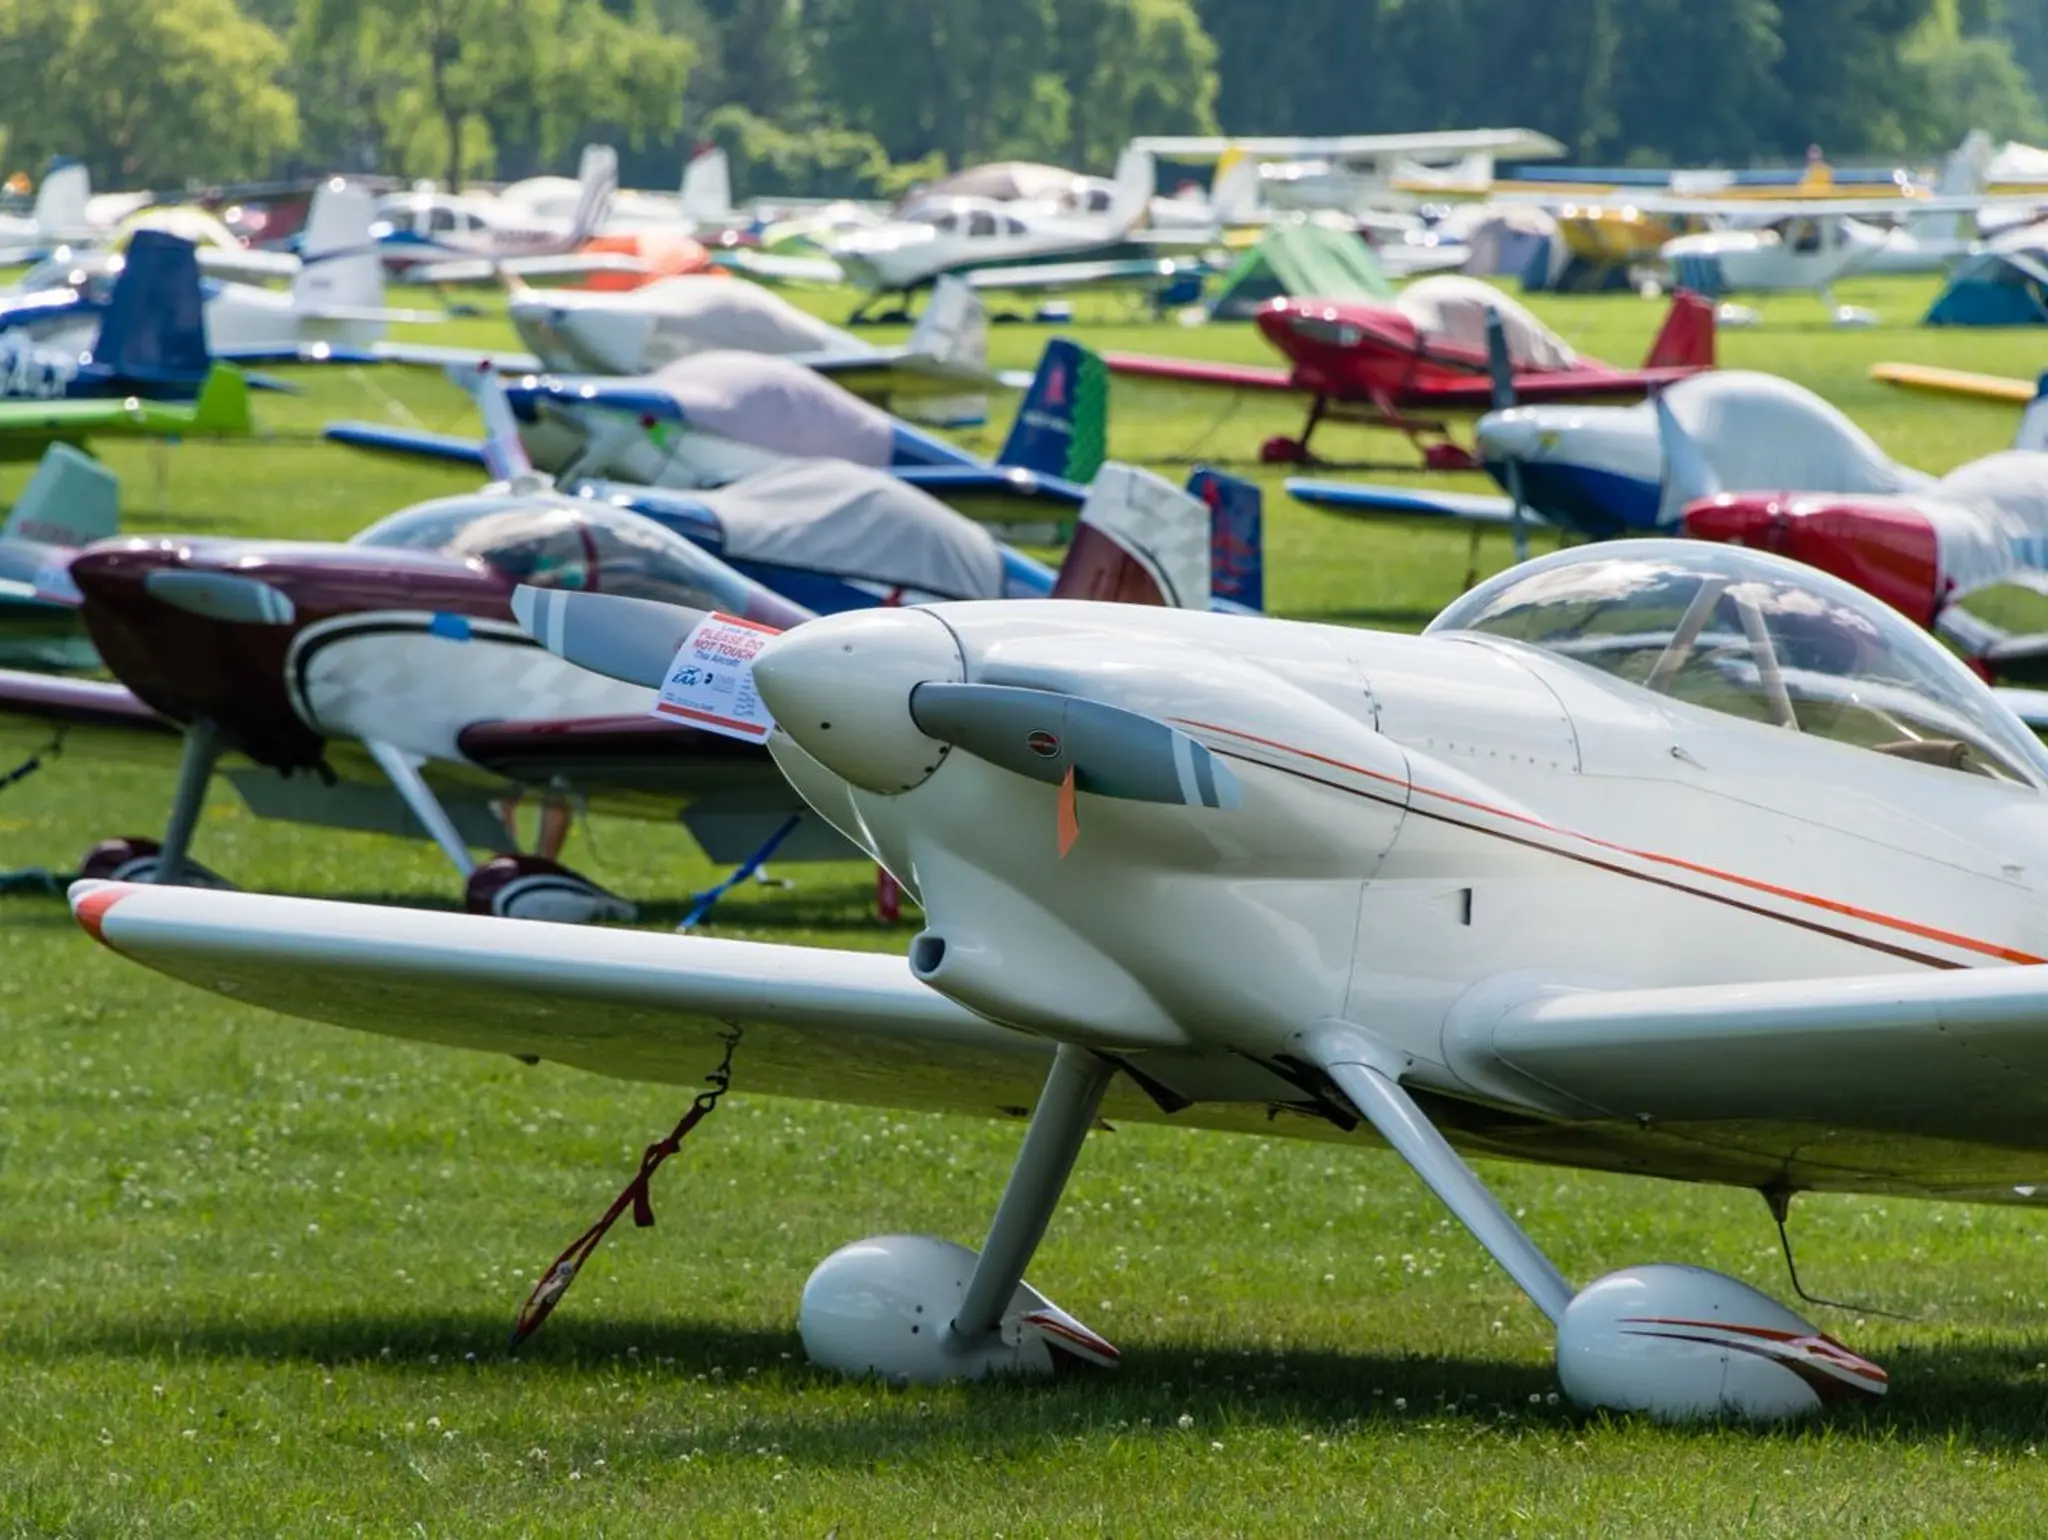 What to expect at AirVenture 2022